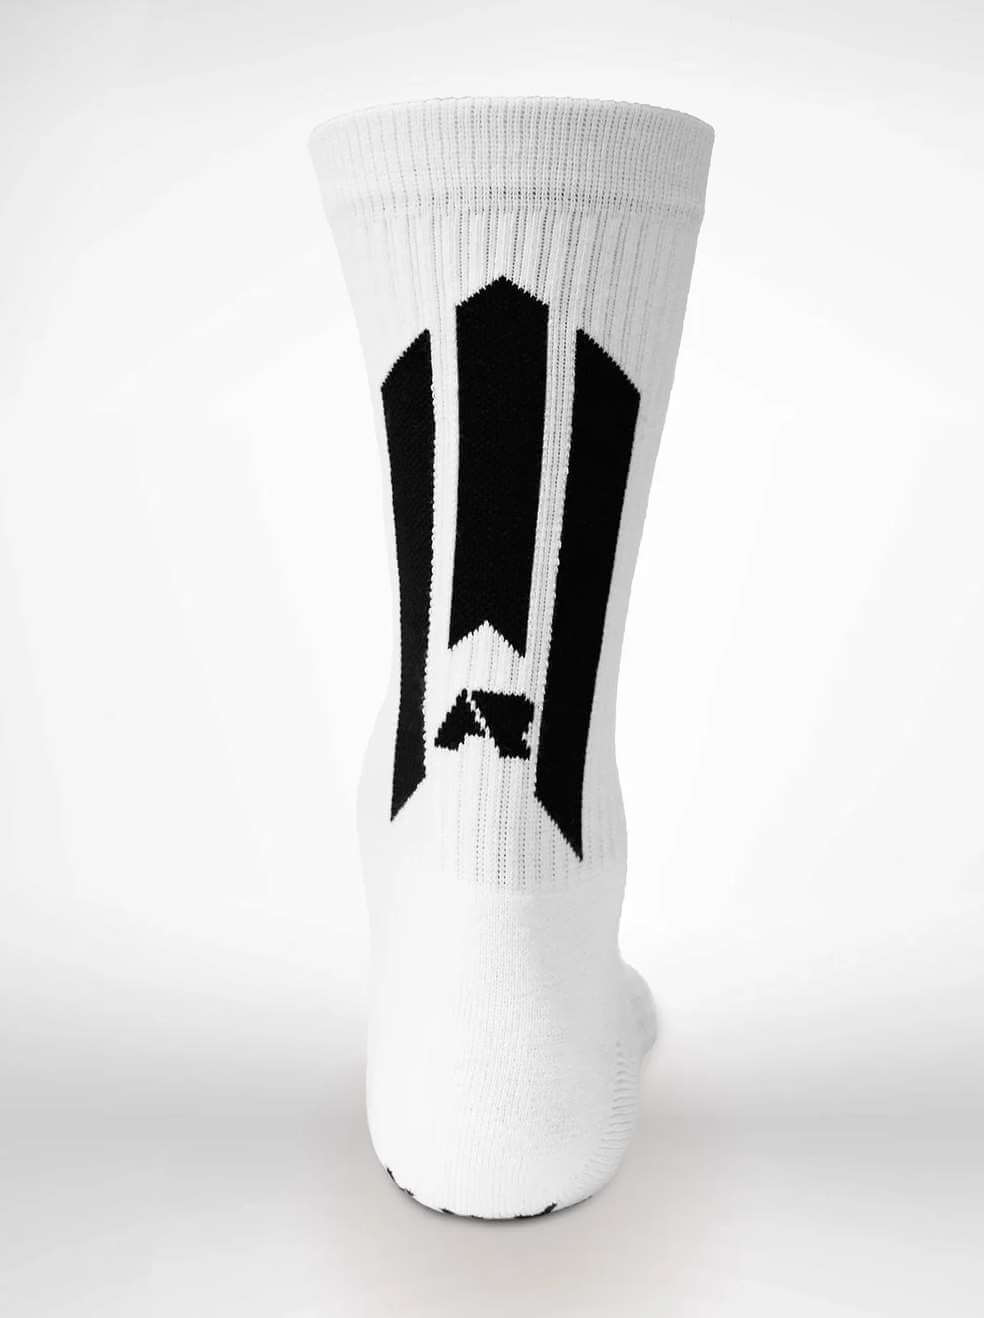 Rise Sports Grip Socks: Superior Traction and Stability for Enhanced Performance